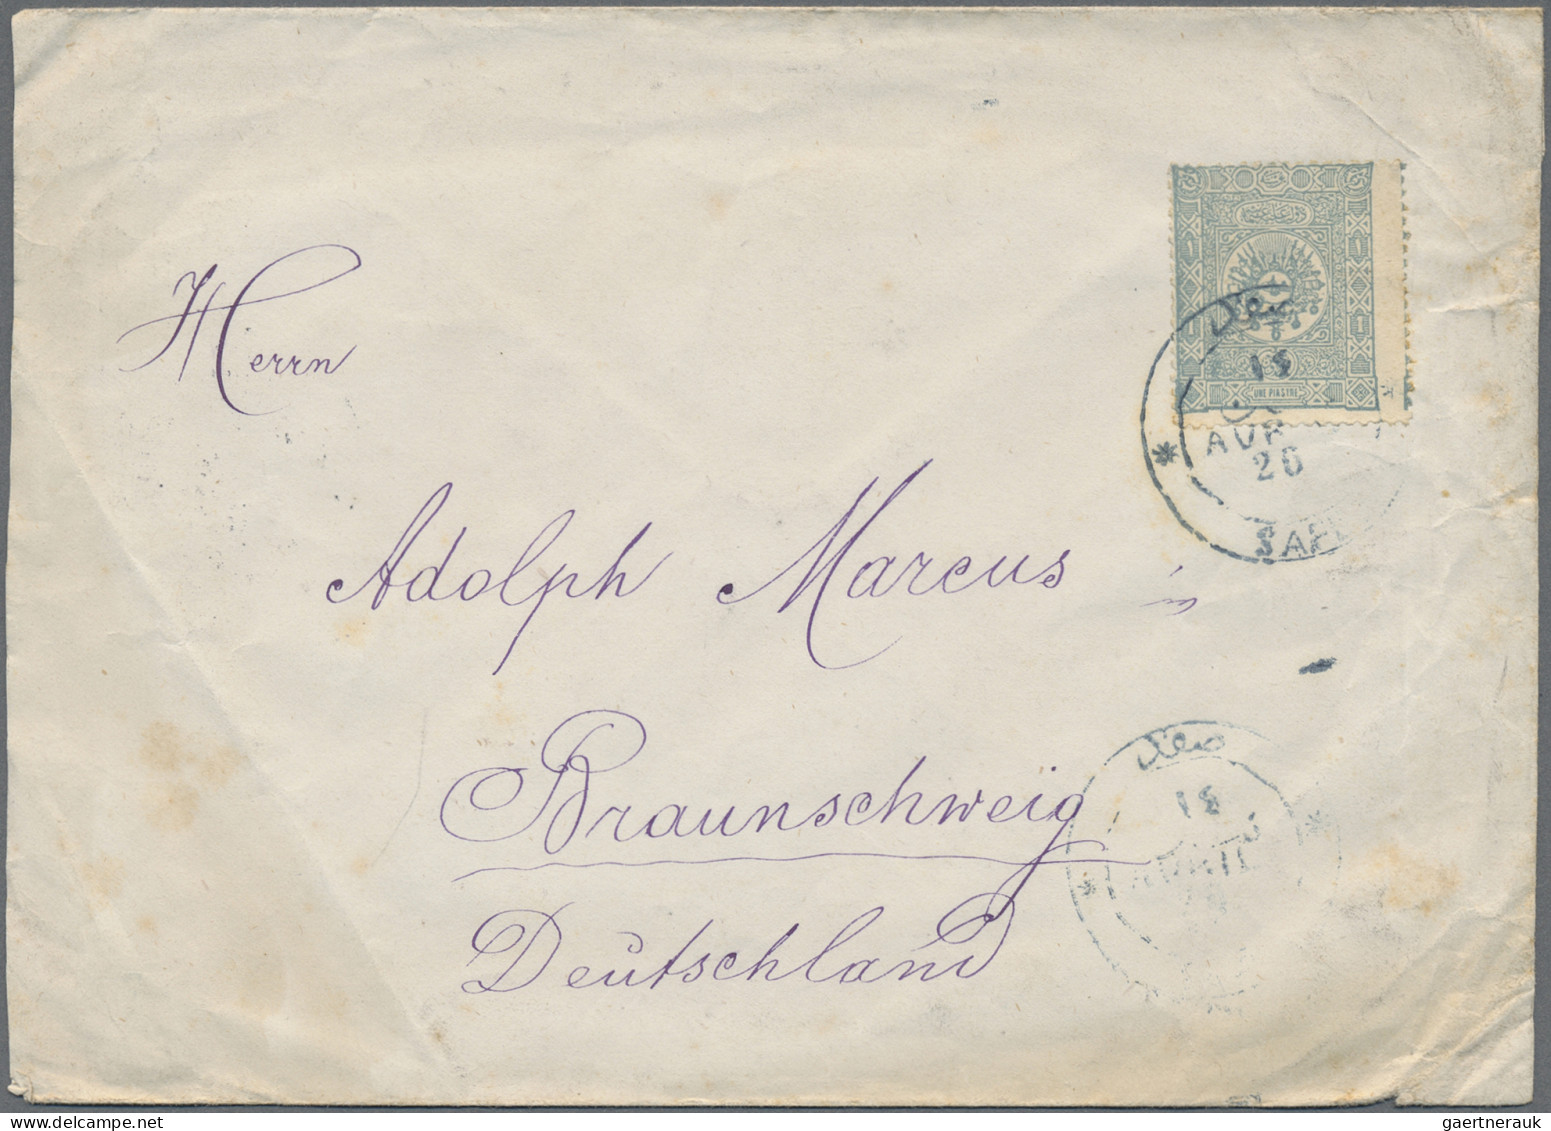 Holy Land: 1892/94 Two Covers From Safed To Braunschweig, Germany Cancelled By B - Palästina